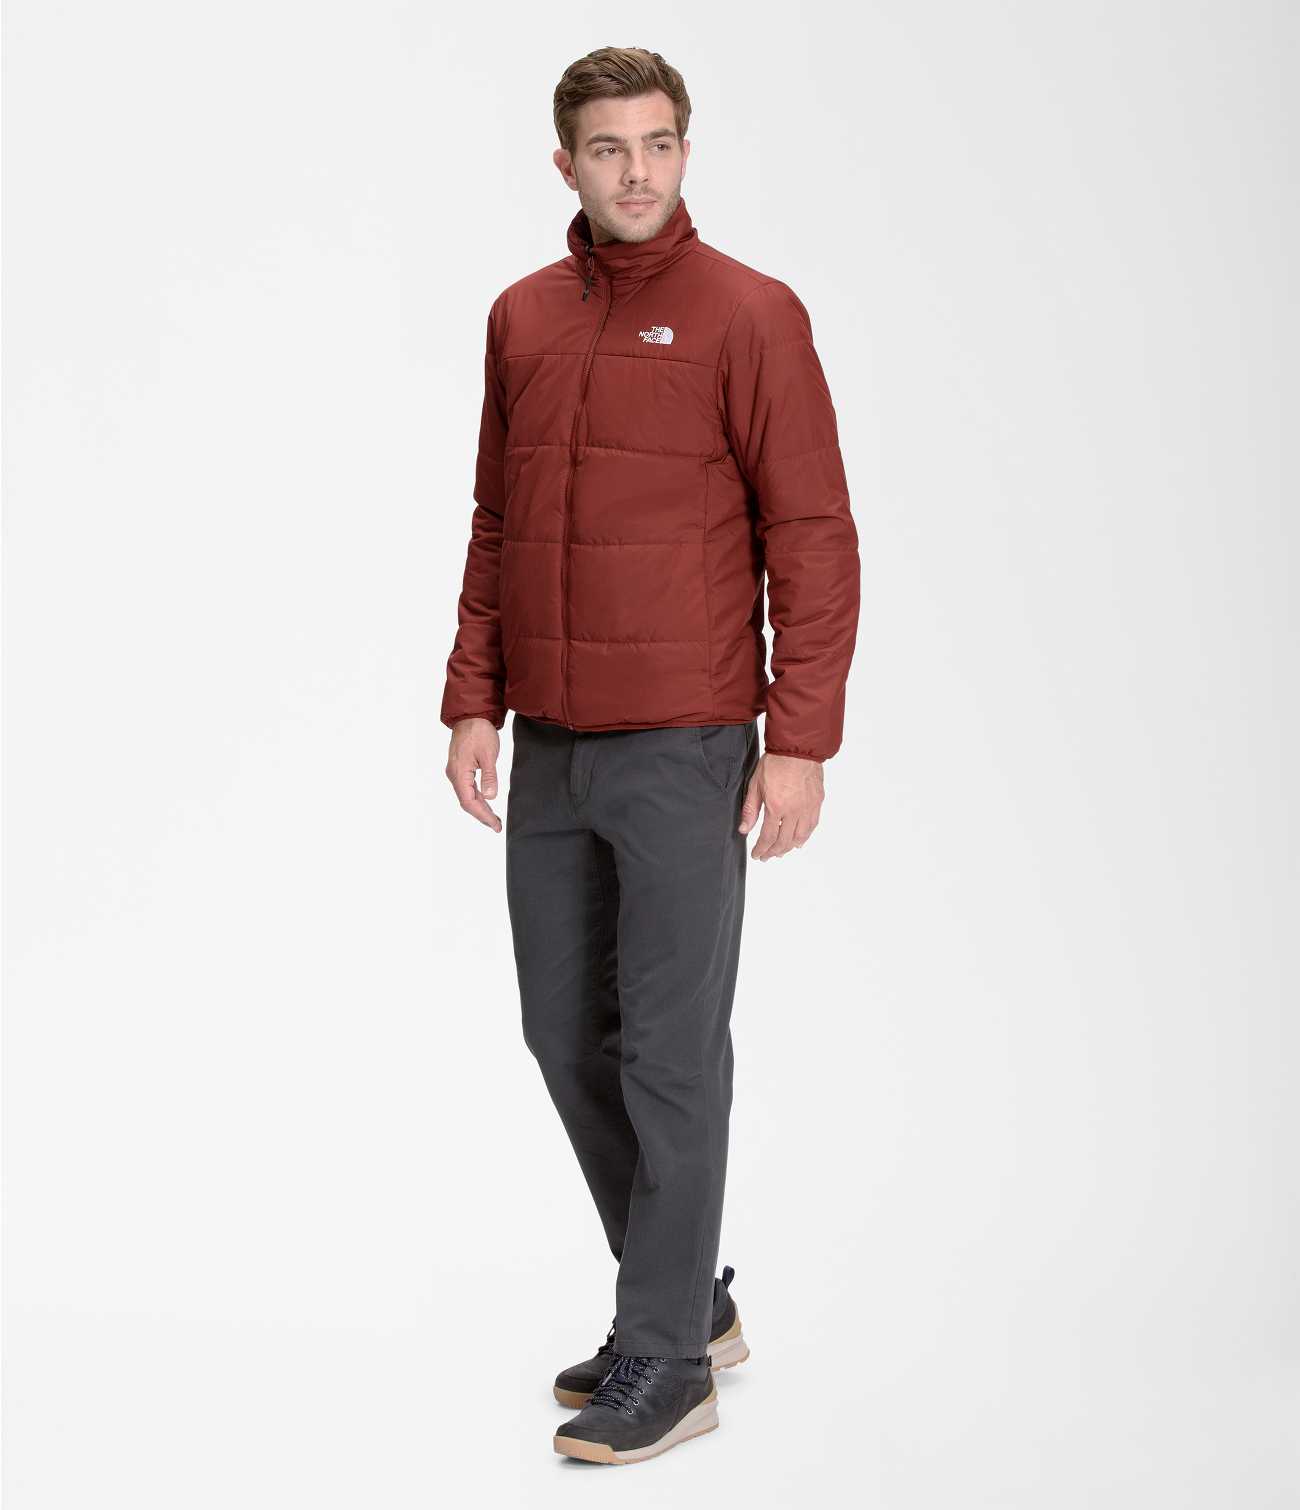 M TOWER PEAK JACKET | The North Face | The North Face Renewed